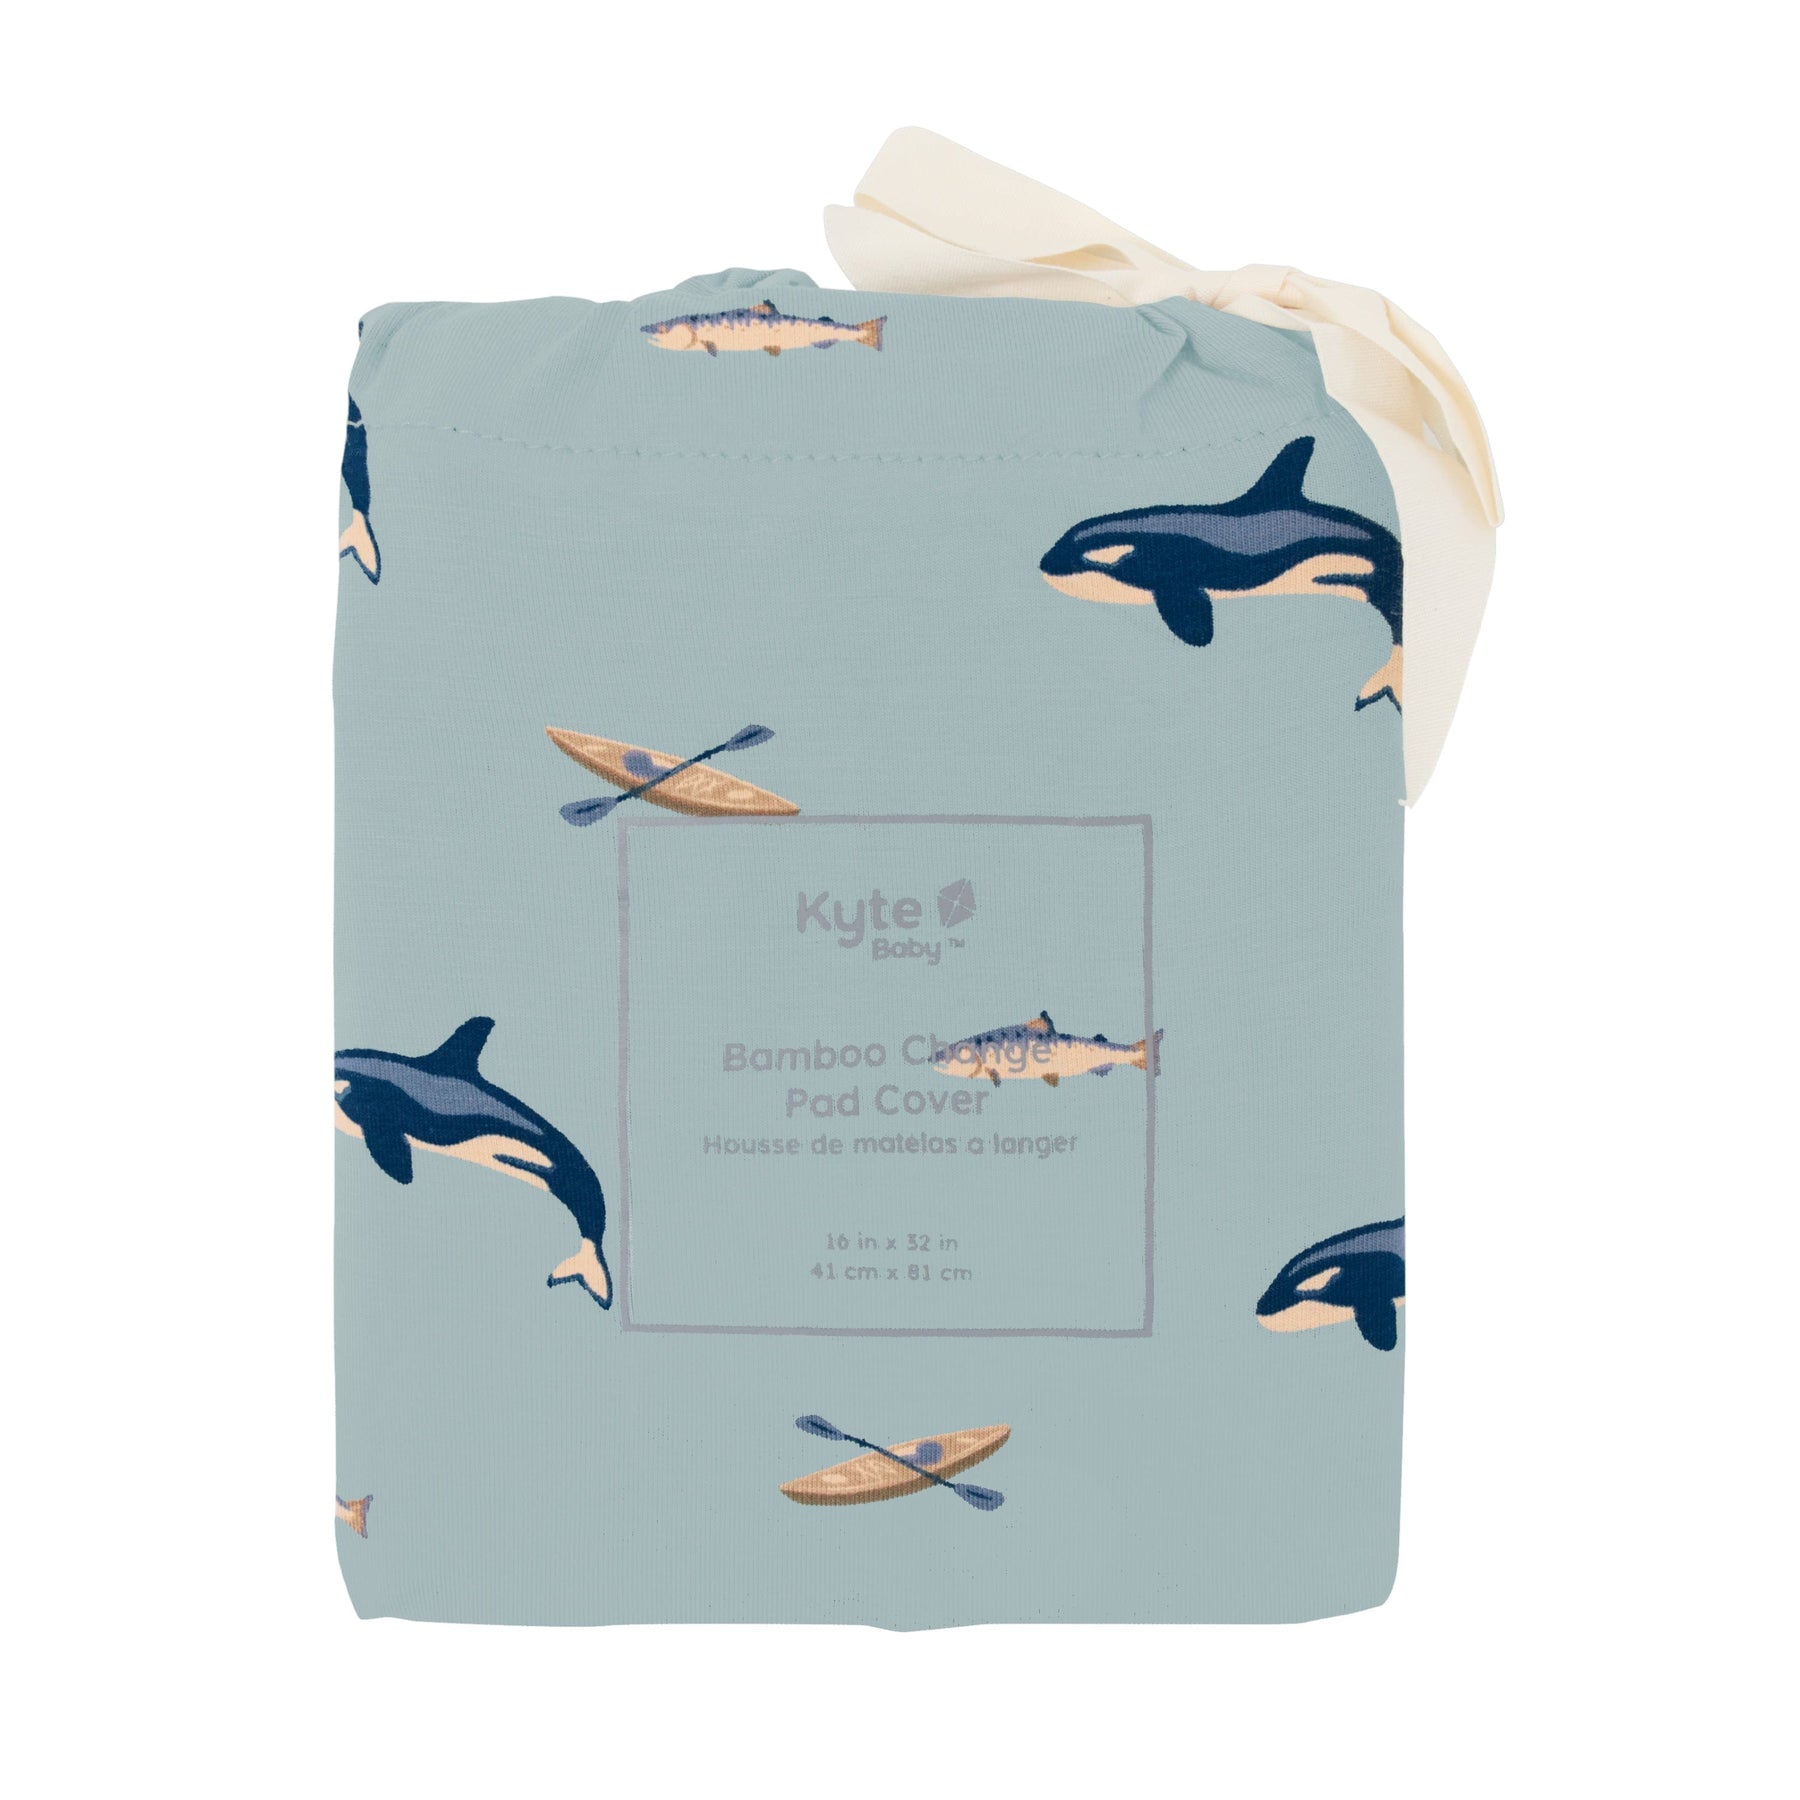 Kyte Baby Change Pad Cover Coastline / One Size Change Pad Cover in Coastline